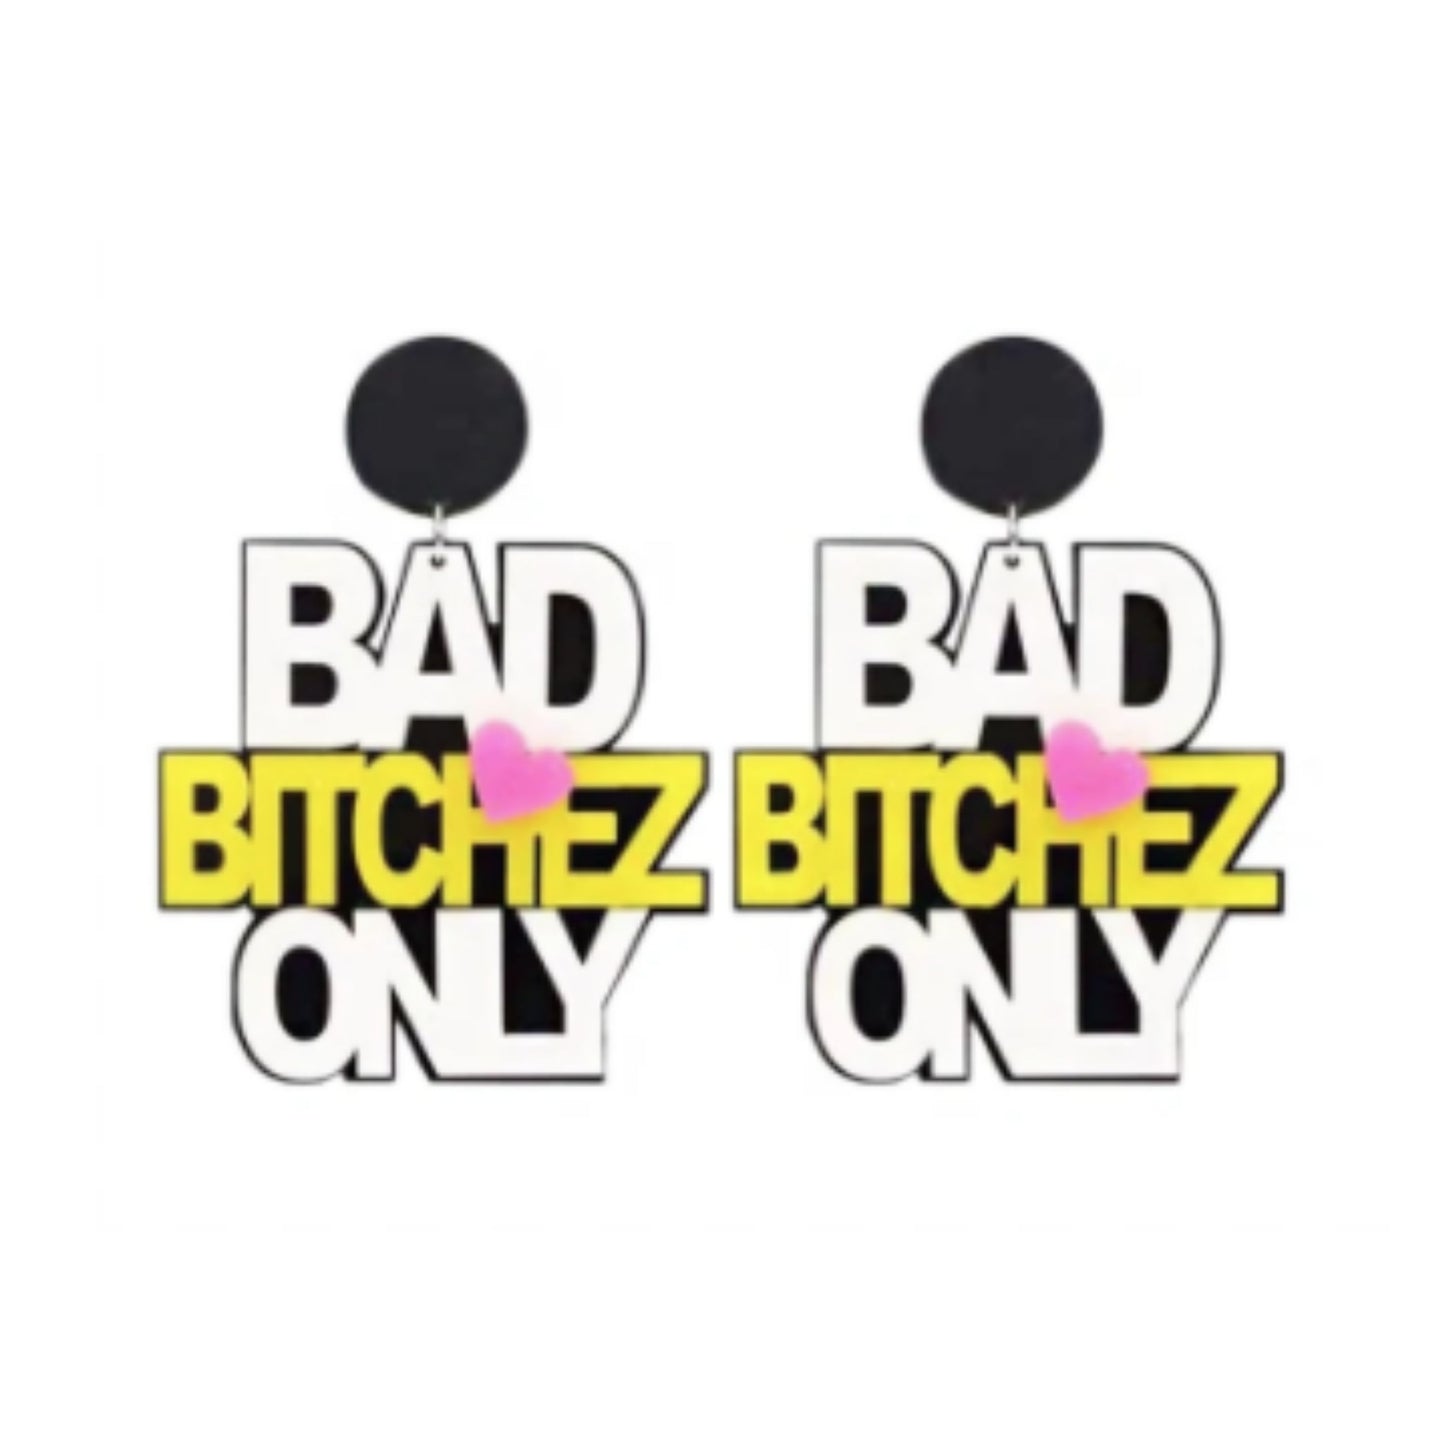 Bad B*tch's Only Bold Loud Club Culture Statement Fashion Earrings